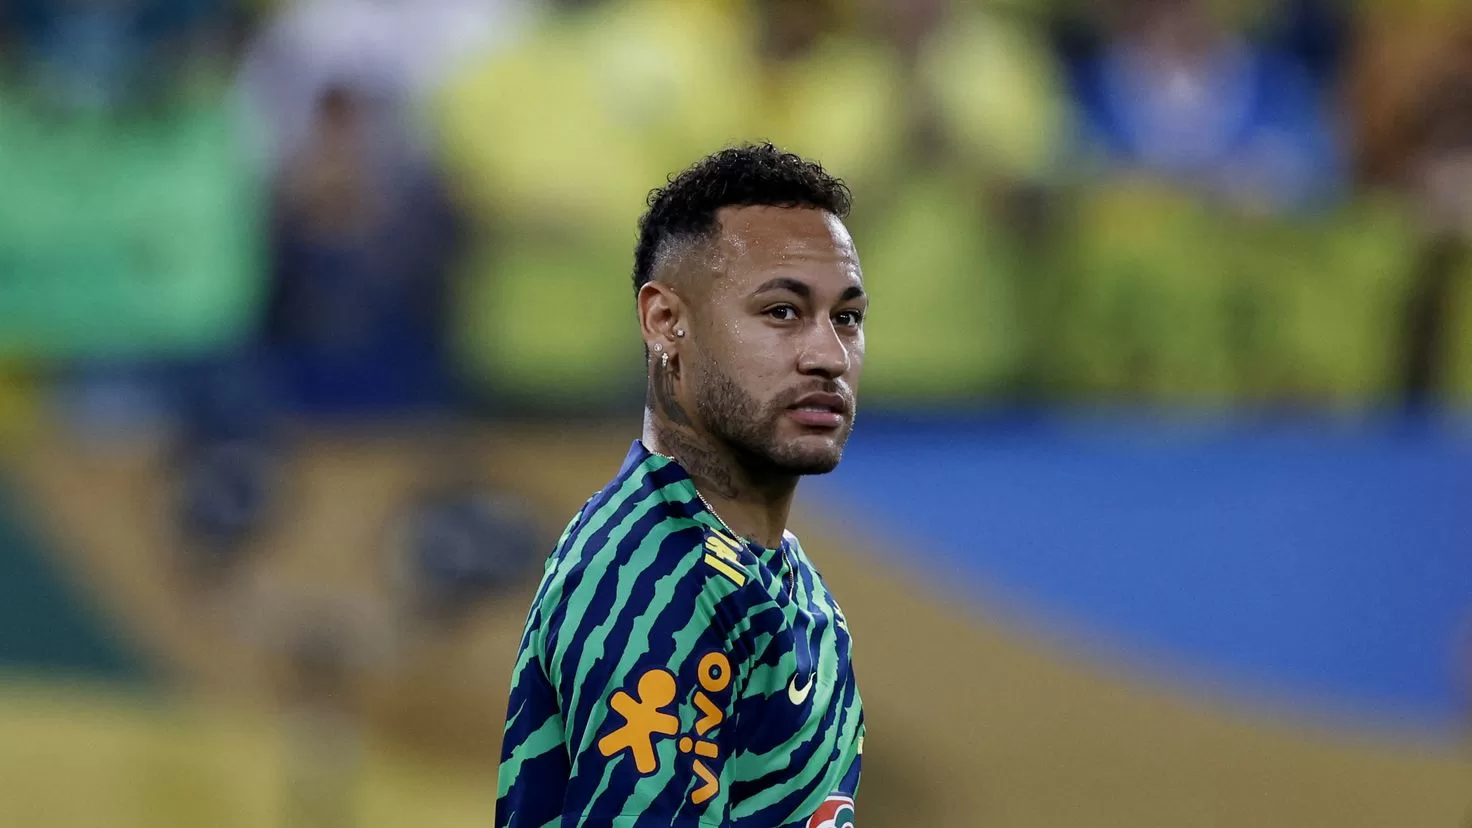 A domestic worker demands 368,000 euros from Neymar for undeclared work
